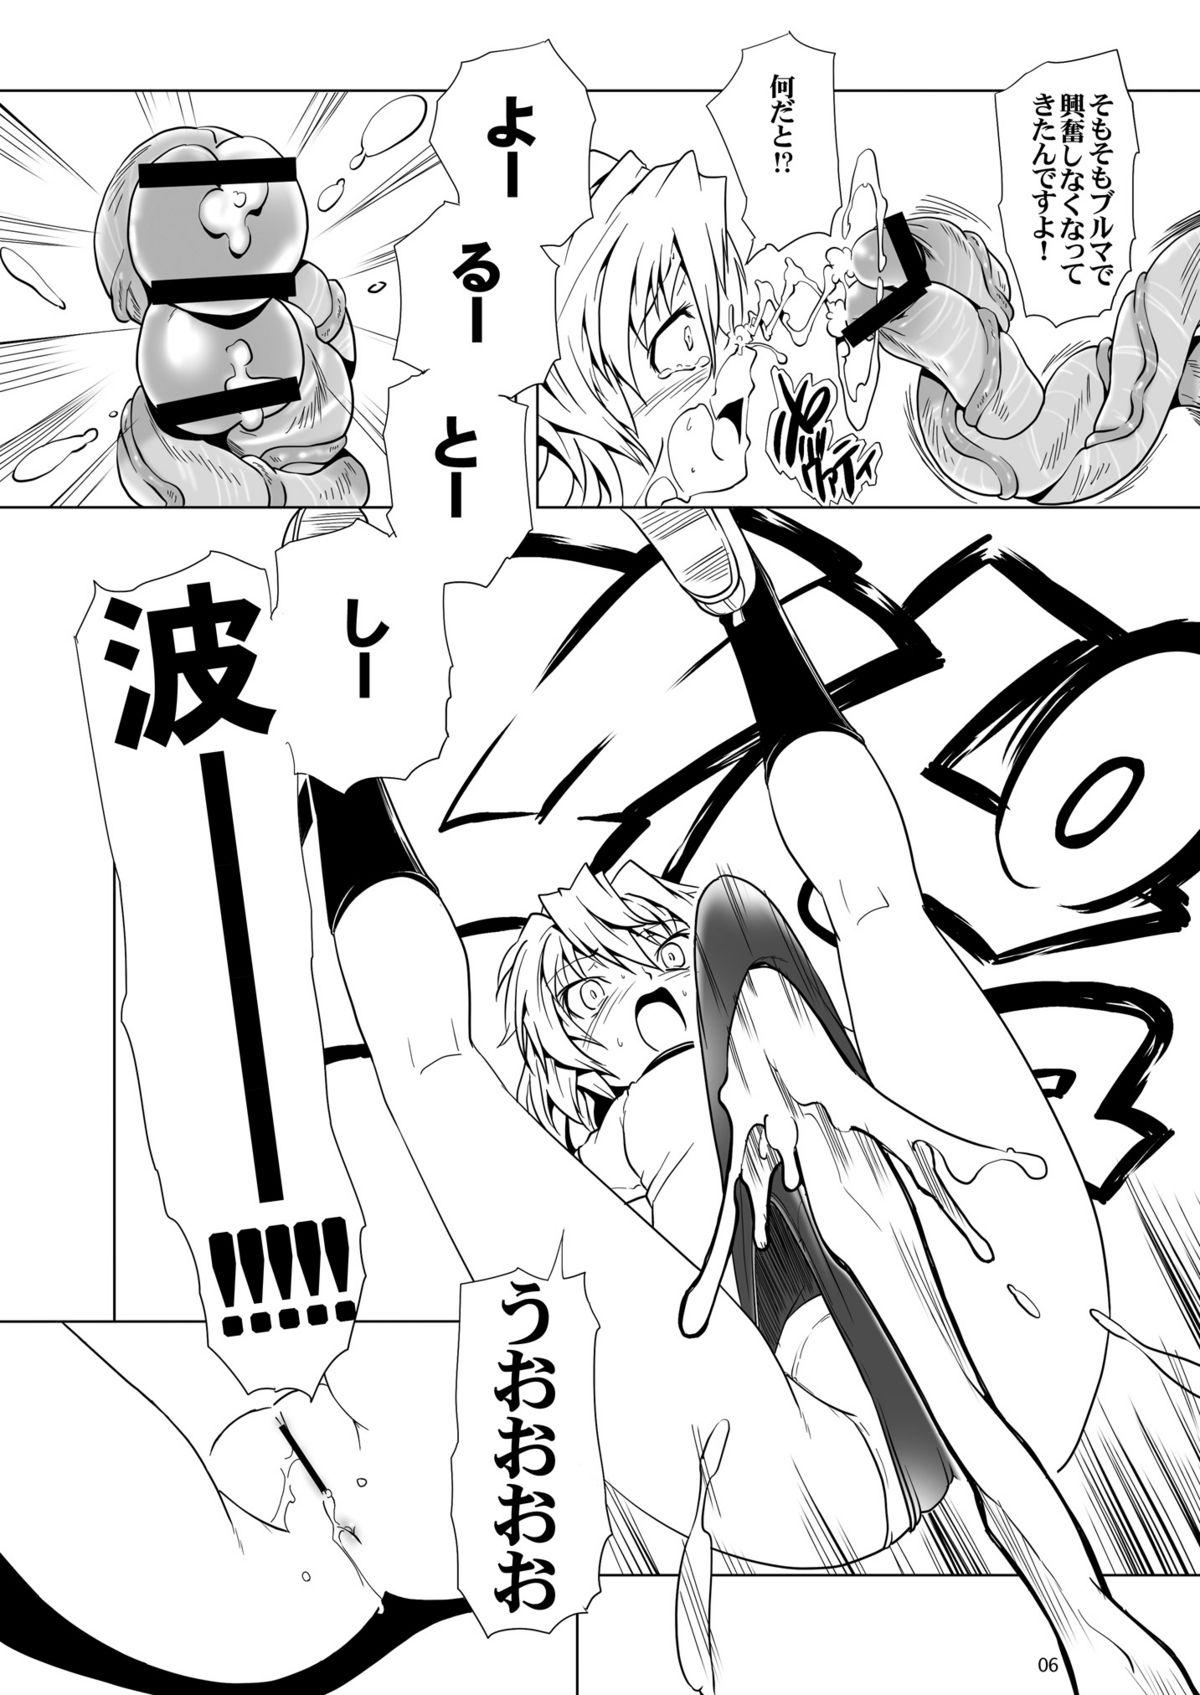 Young Old 魔理沙のブルマでとろろ芋をすりおろす - Touhou project Hot Women Fucking - Page 6